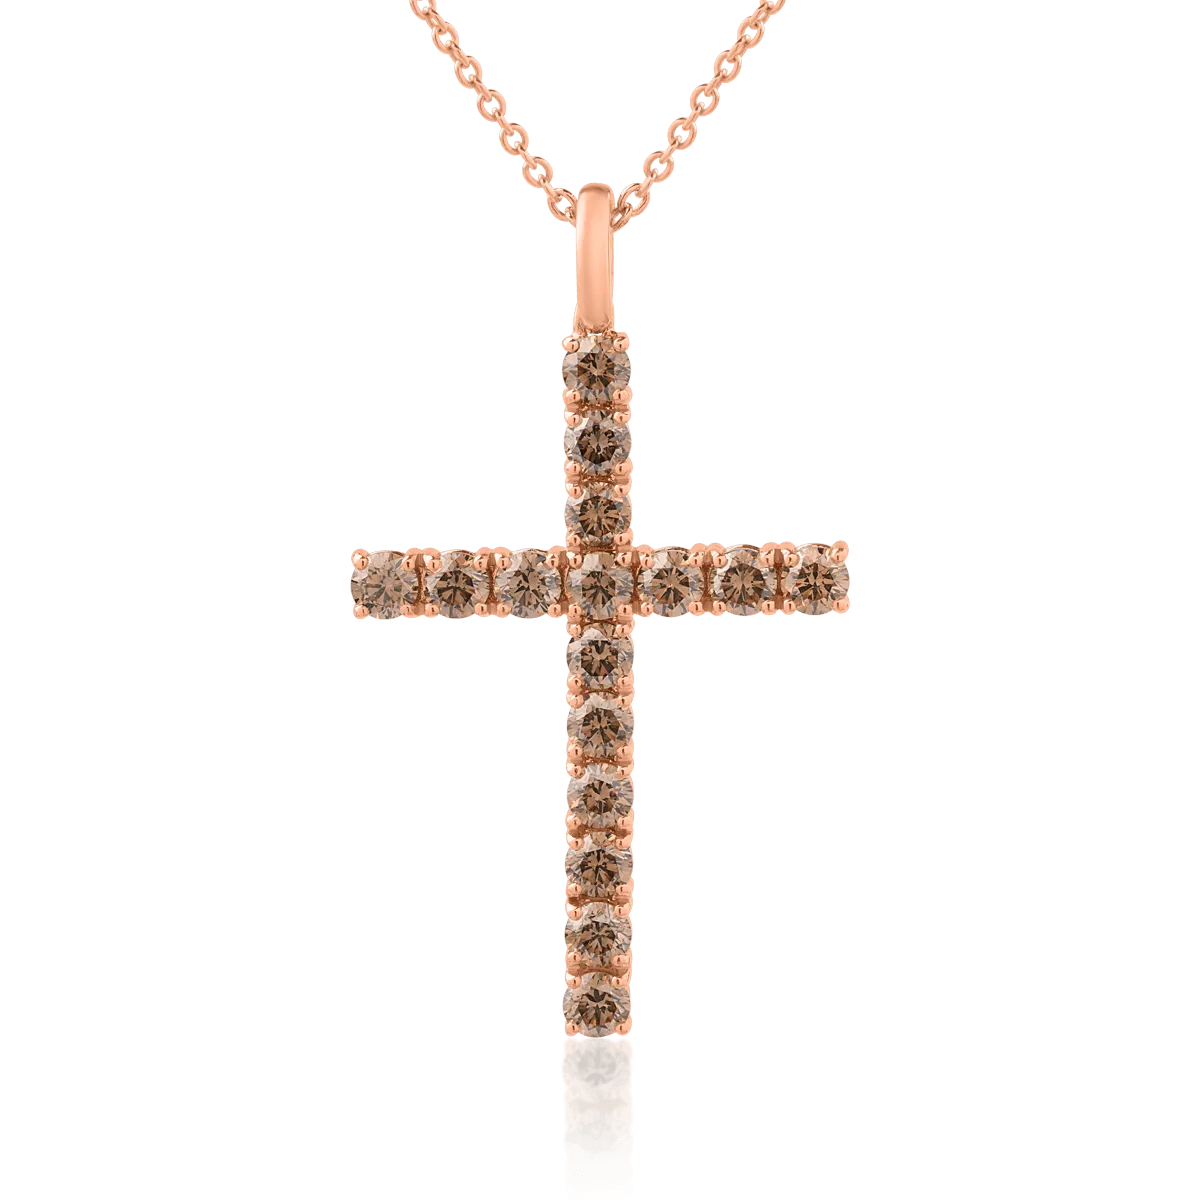 18K rose gold cross pendant chain with 1.35ct brown diamonds